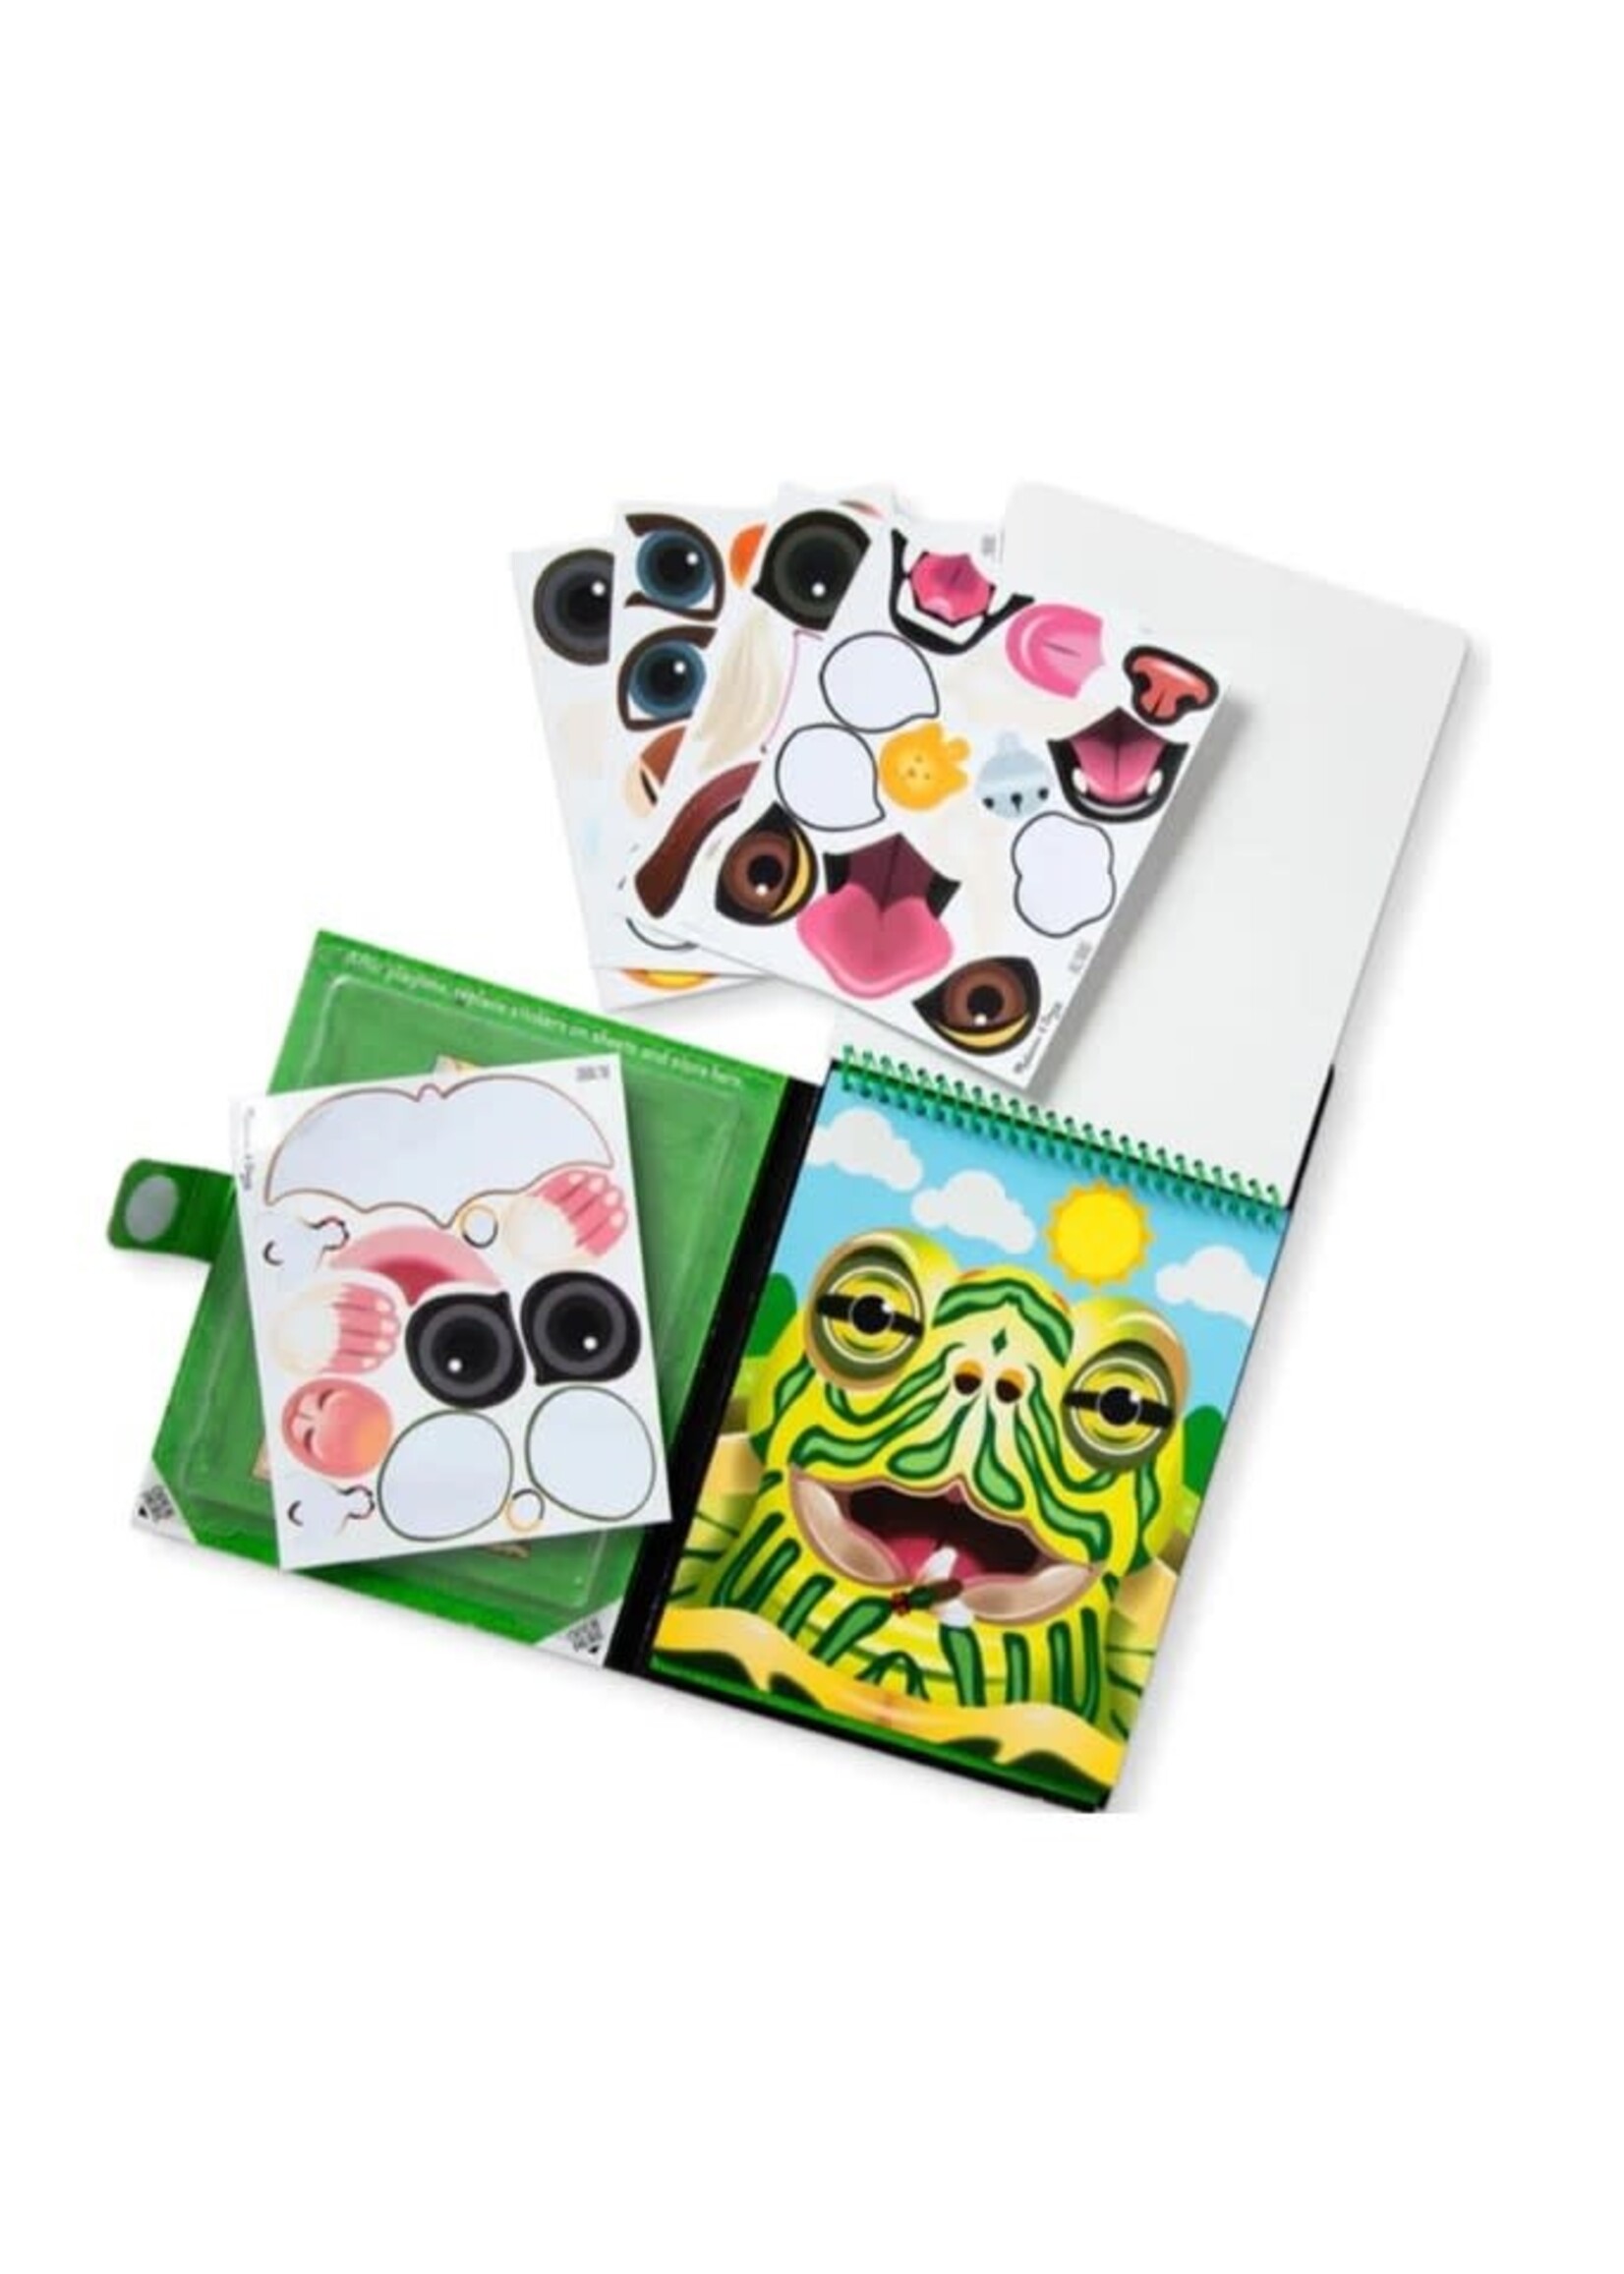 Make-a-Face -Pets Reusable Sticker Pad - On the Go Travel Activity